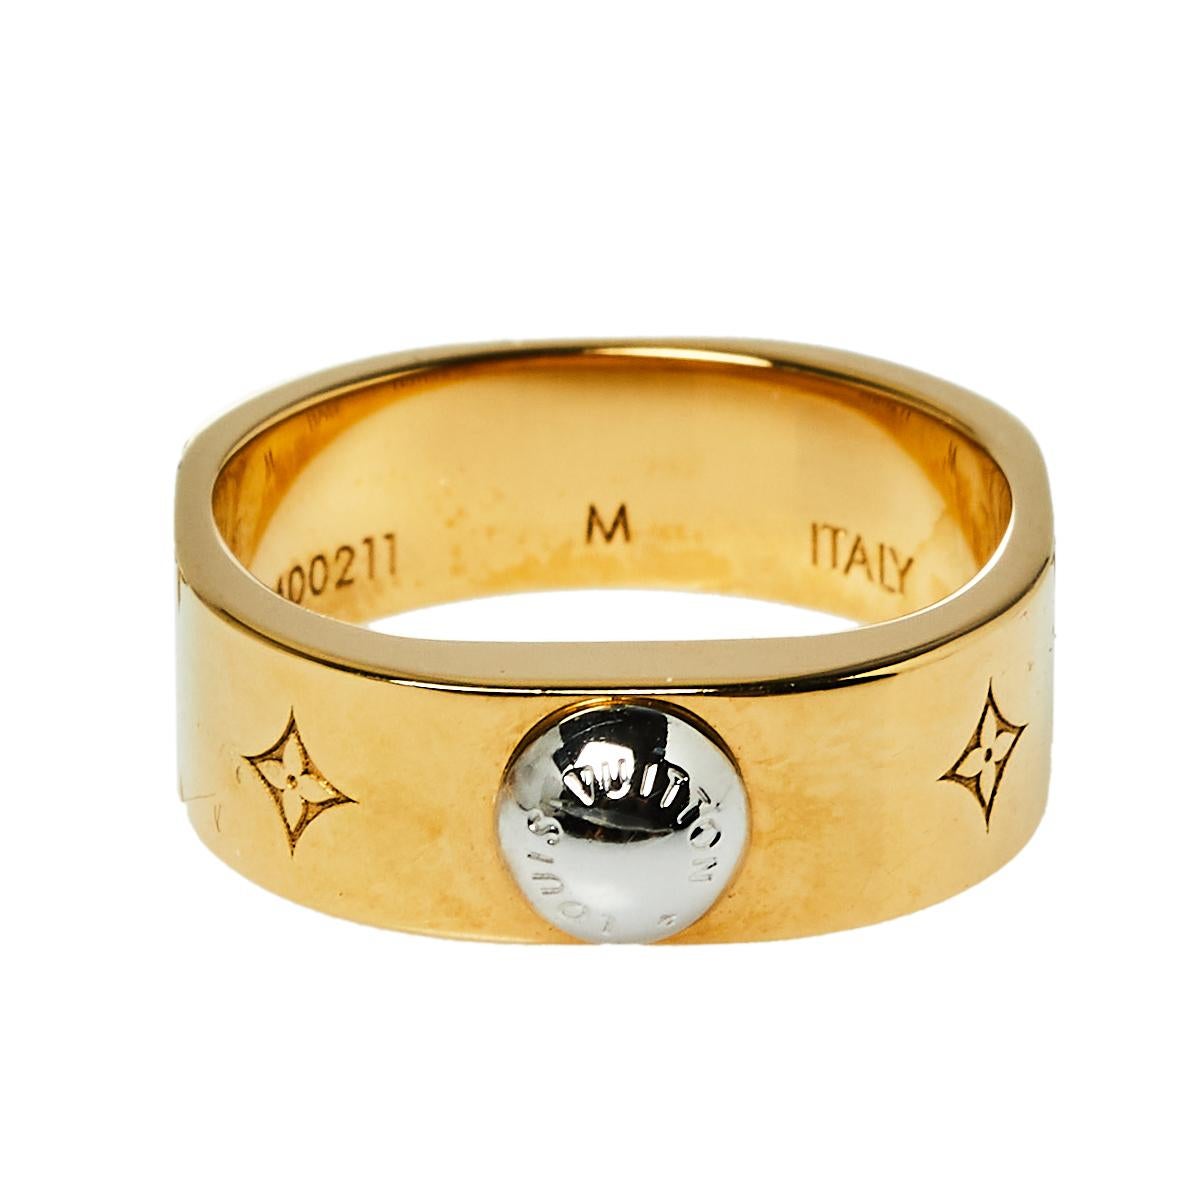 Bound to sit around your finger and exude beauty, this Louis Vuitton Nanogram ring is a great buy. It is made from two-tone metal and engraved with signature motifs. The ring has a smooth finish and a luxe appeal.

Includes: Original Dustbag,